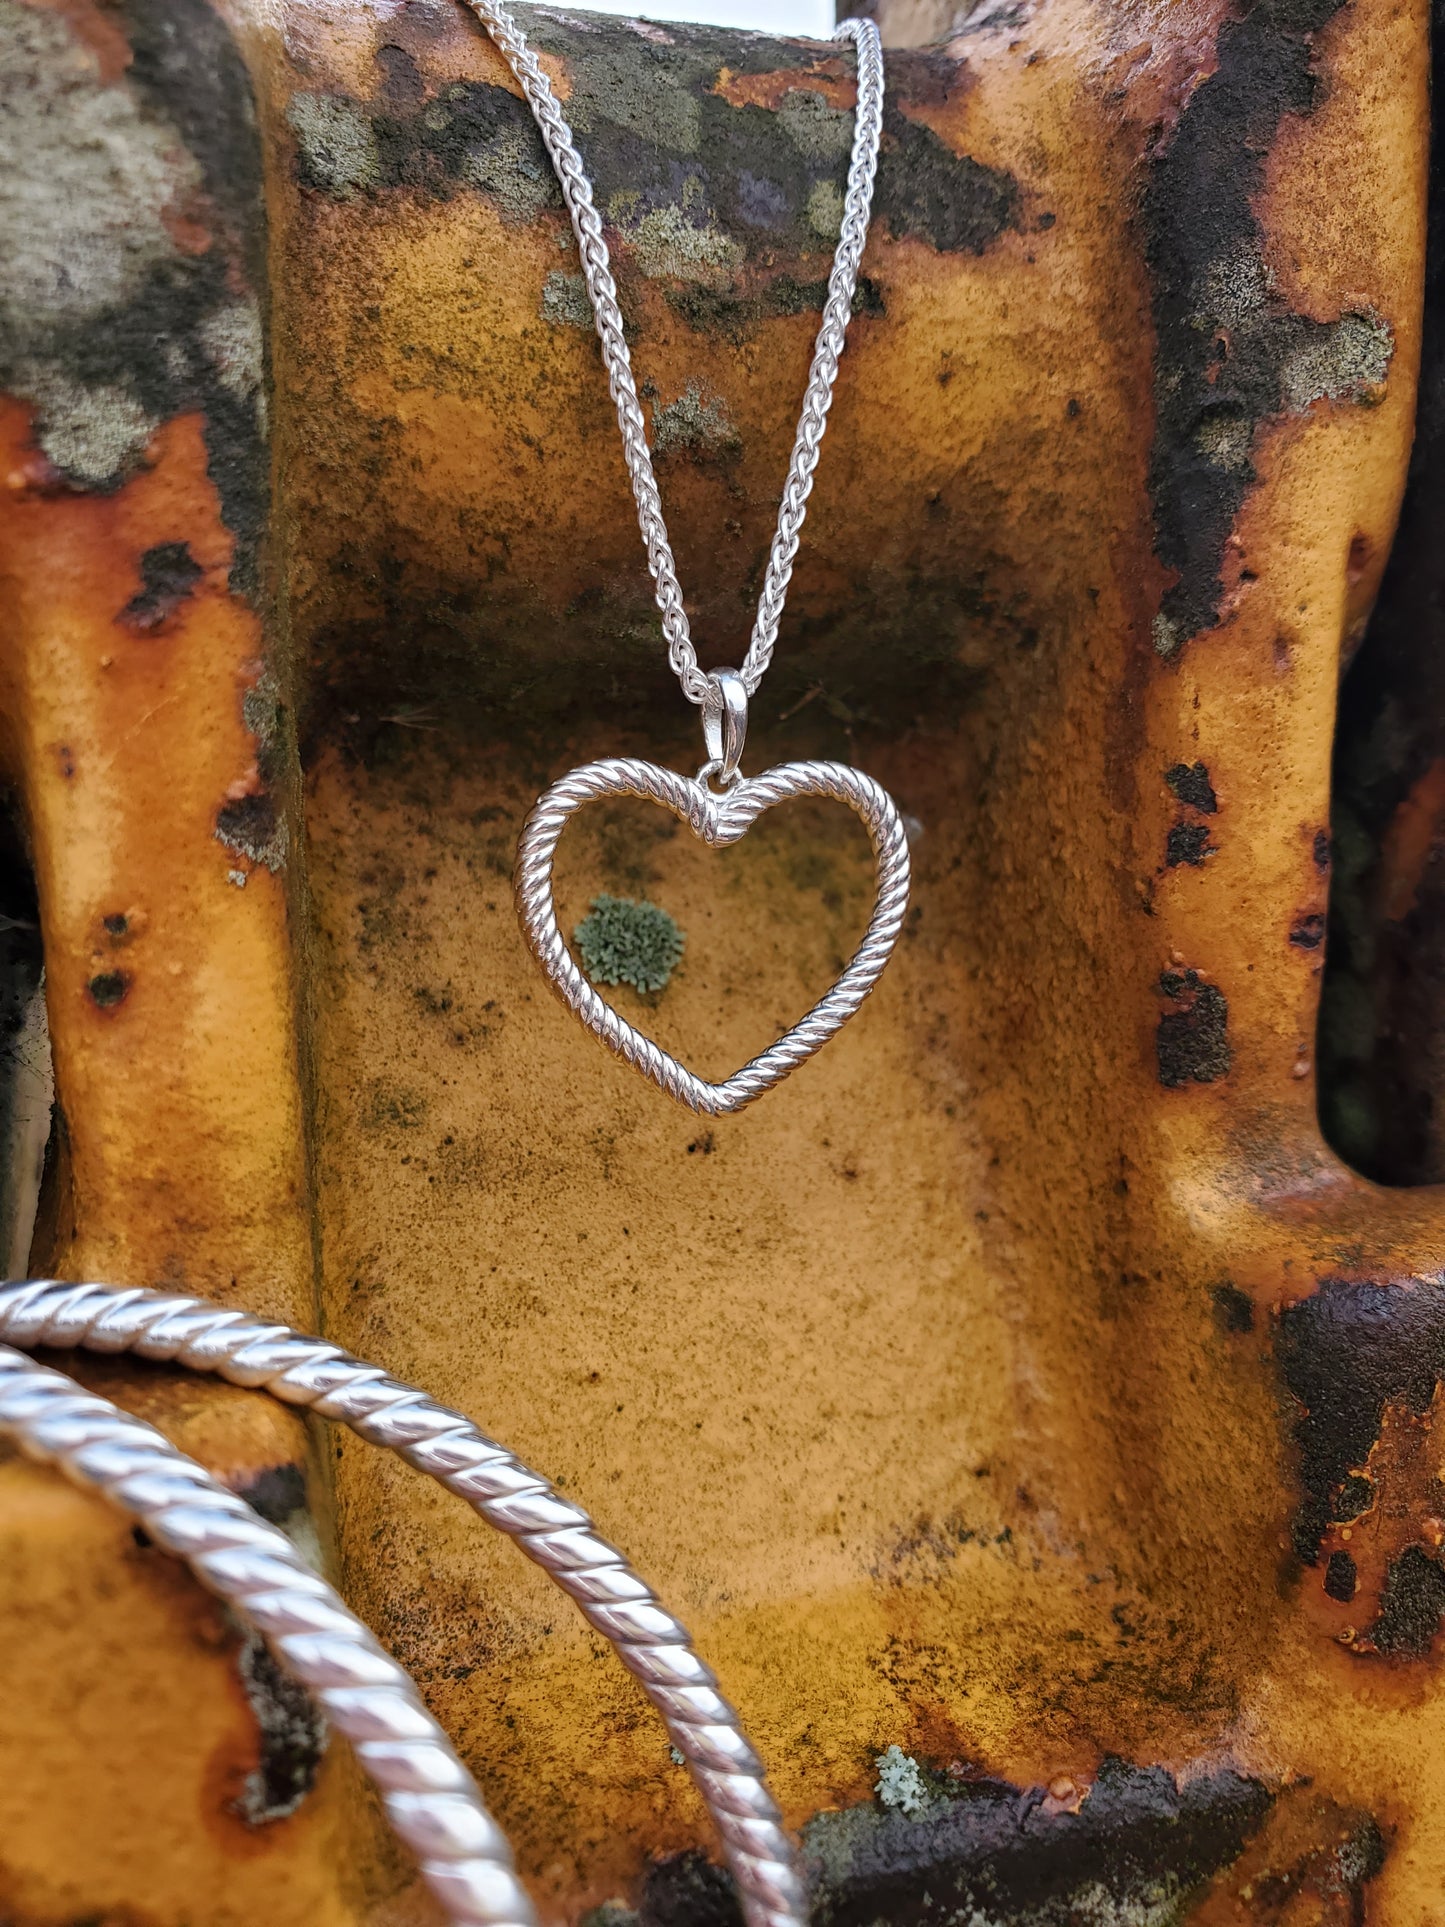 Heart Rope Pendant: Cowgirl Heart Jewelry, Western Rope Jewelry, Western Bridal Jewelry, Sterling Silver Rope Necklace